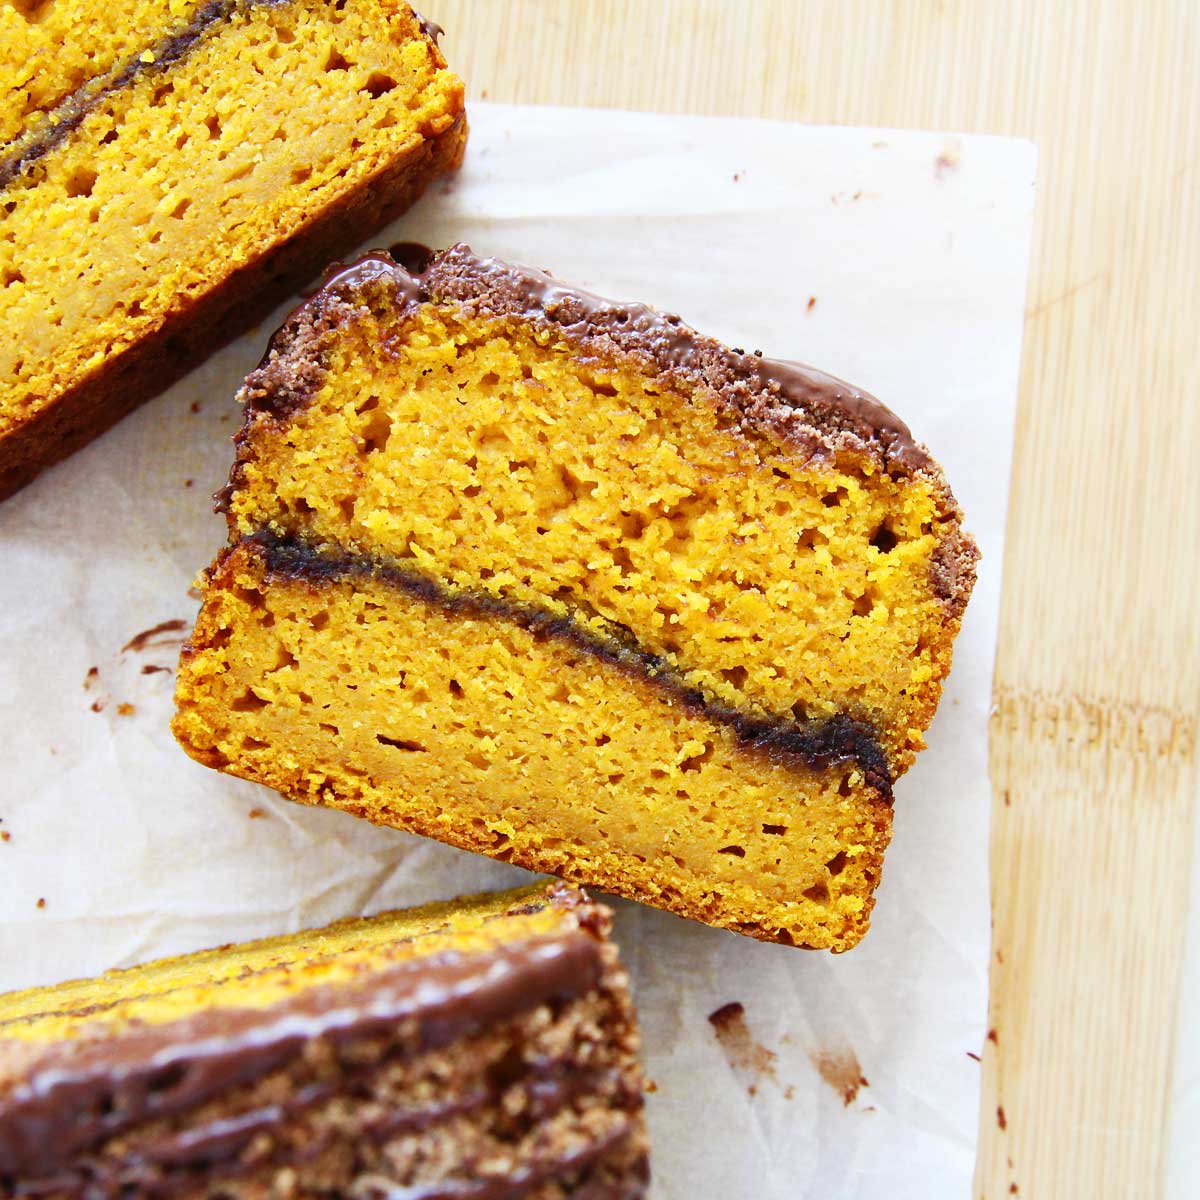 Nutella Swirl Pumpkin Bread with Chocolate Crumble Topping - swiss roll